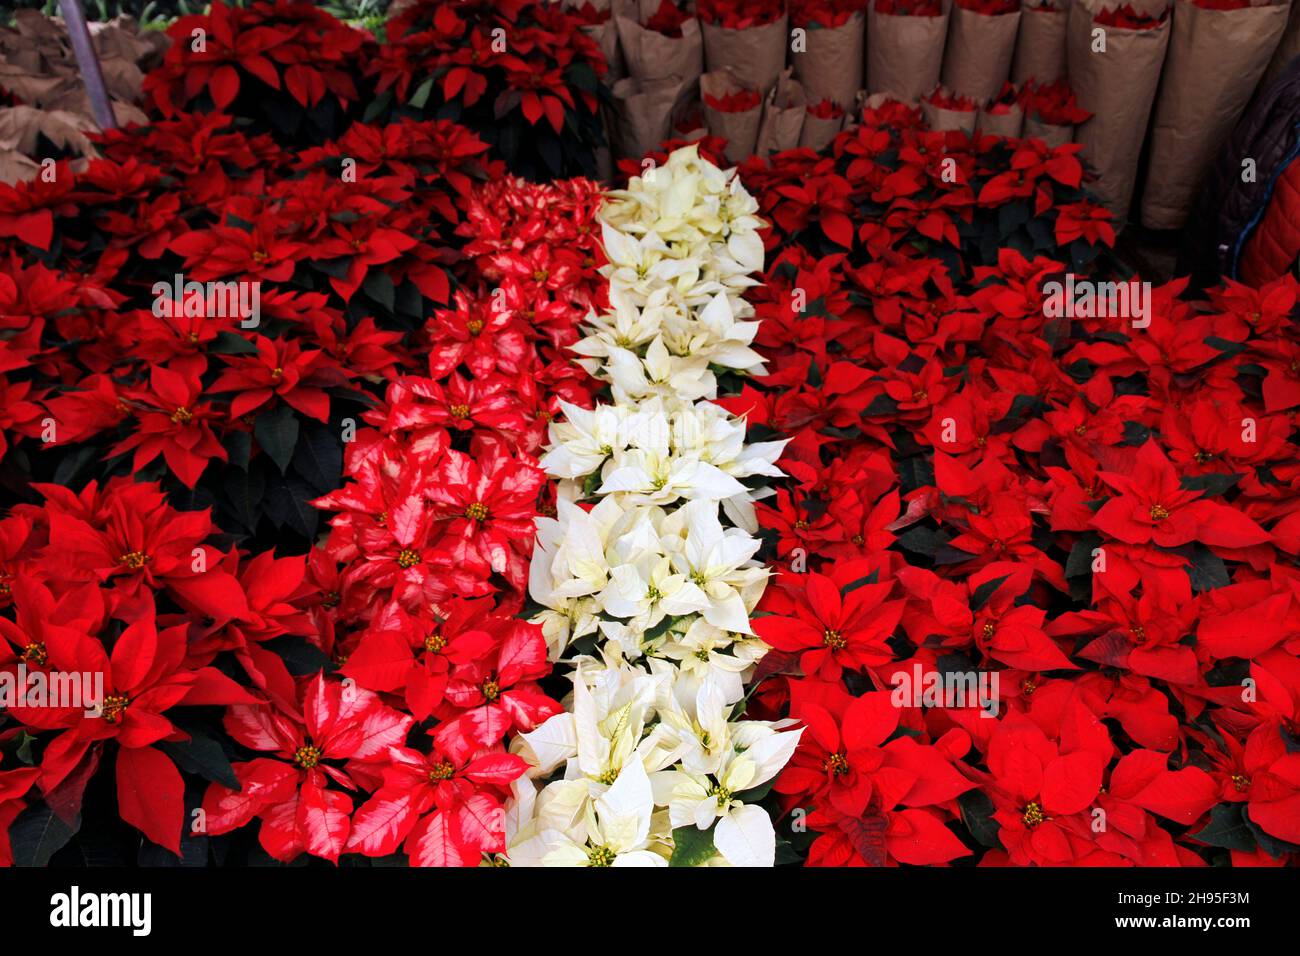 Non Exclusive: MEXICO CITY, MEXICO - DECEMBER 3, 2021: Persons visit stands of Farmers that offer the traditional Christmas Eve Flower in its various Stock Photo